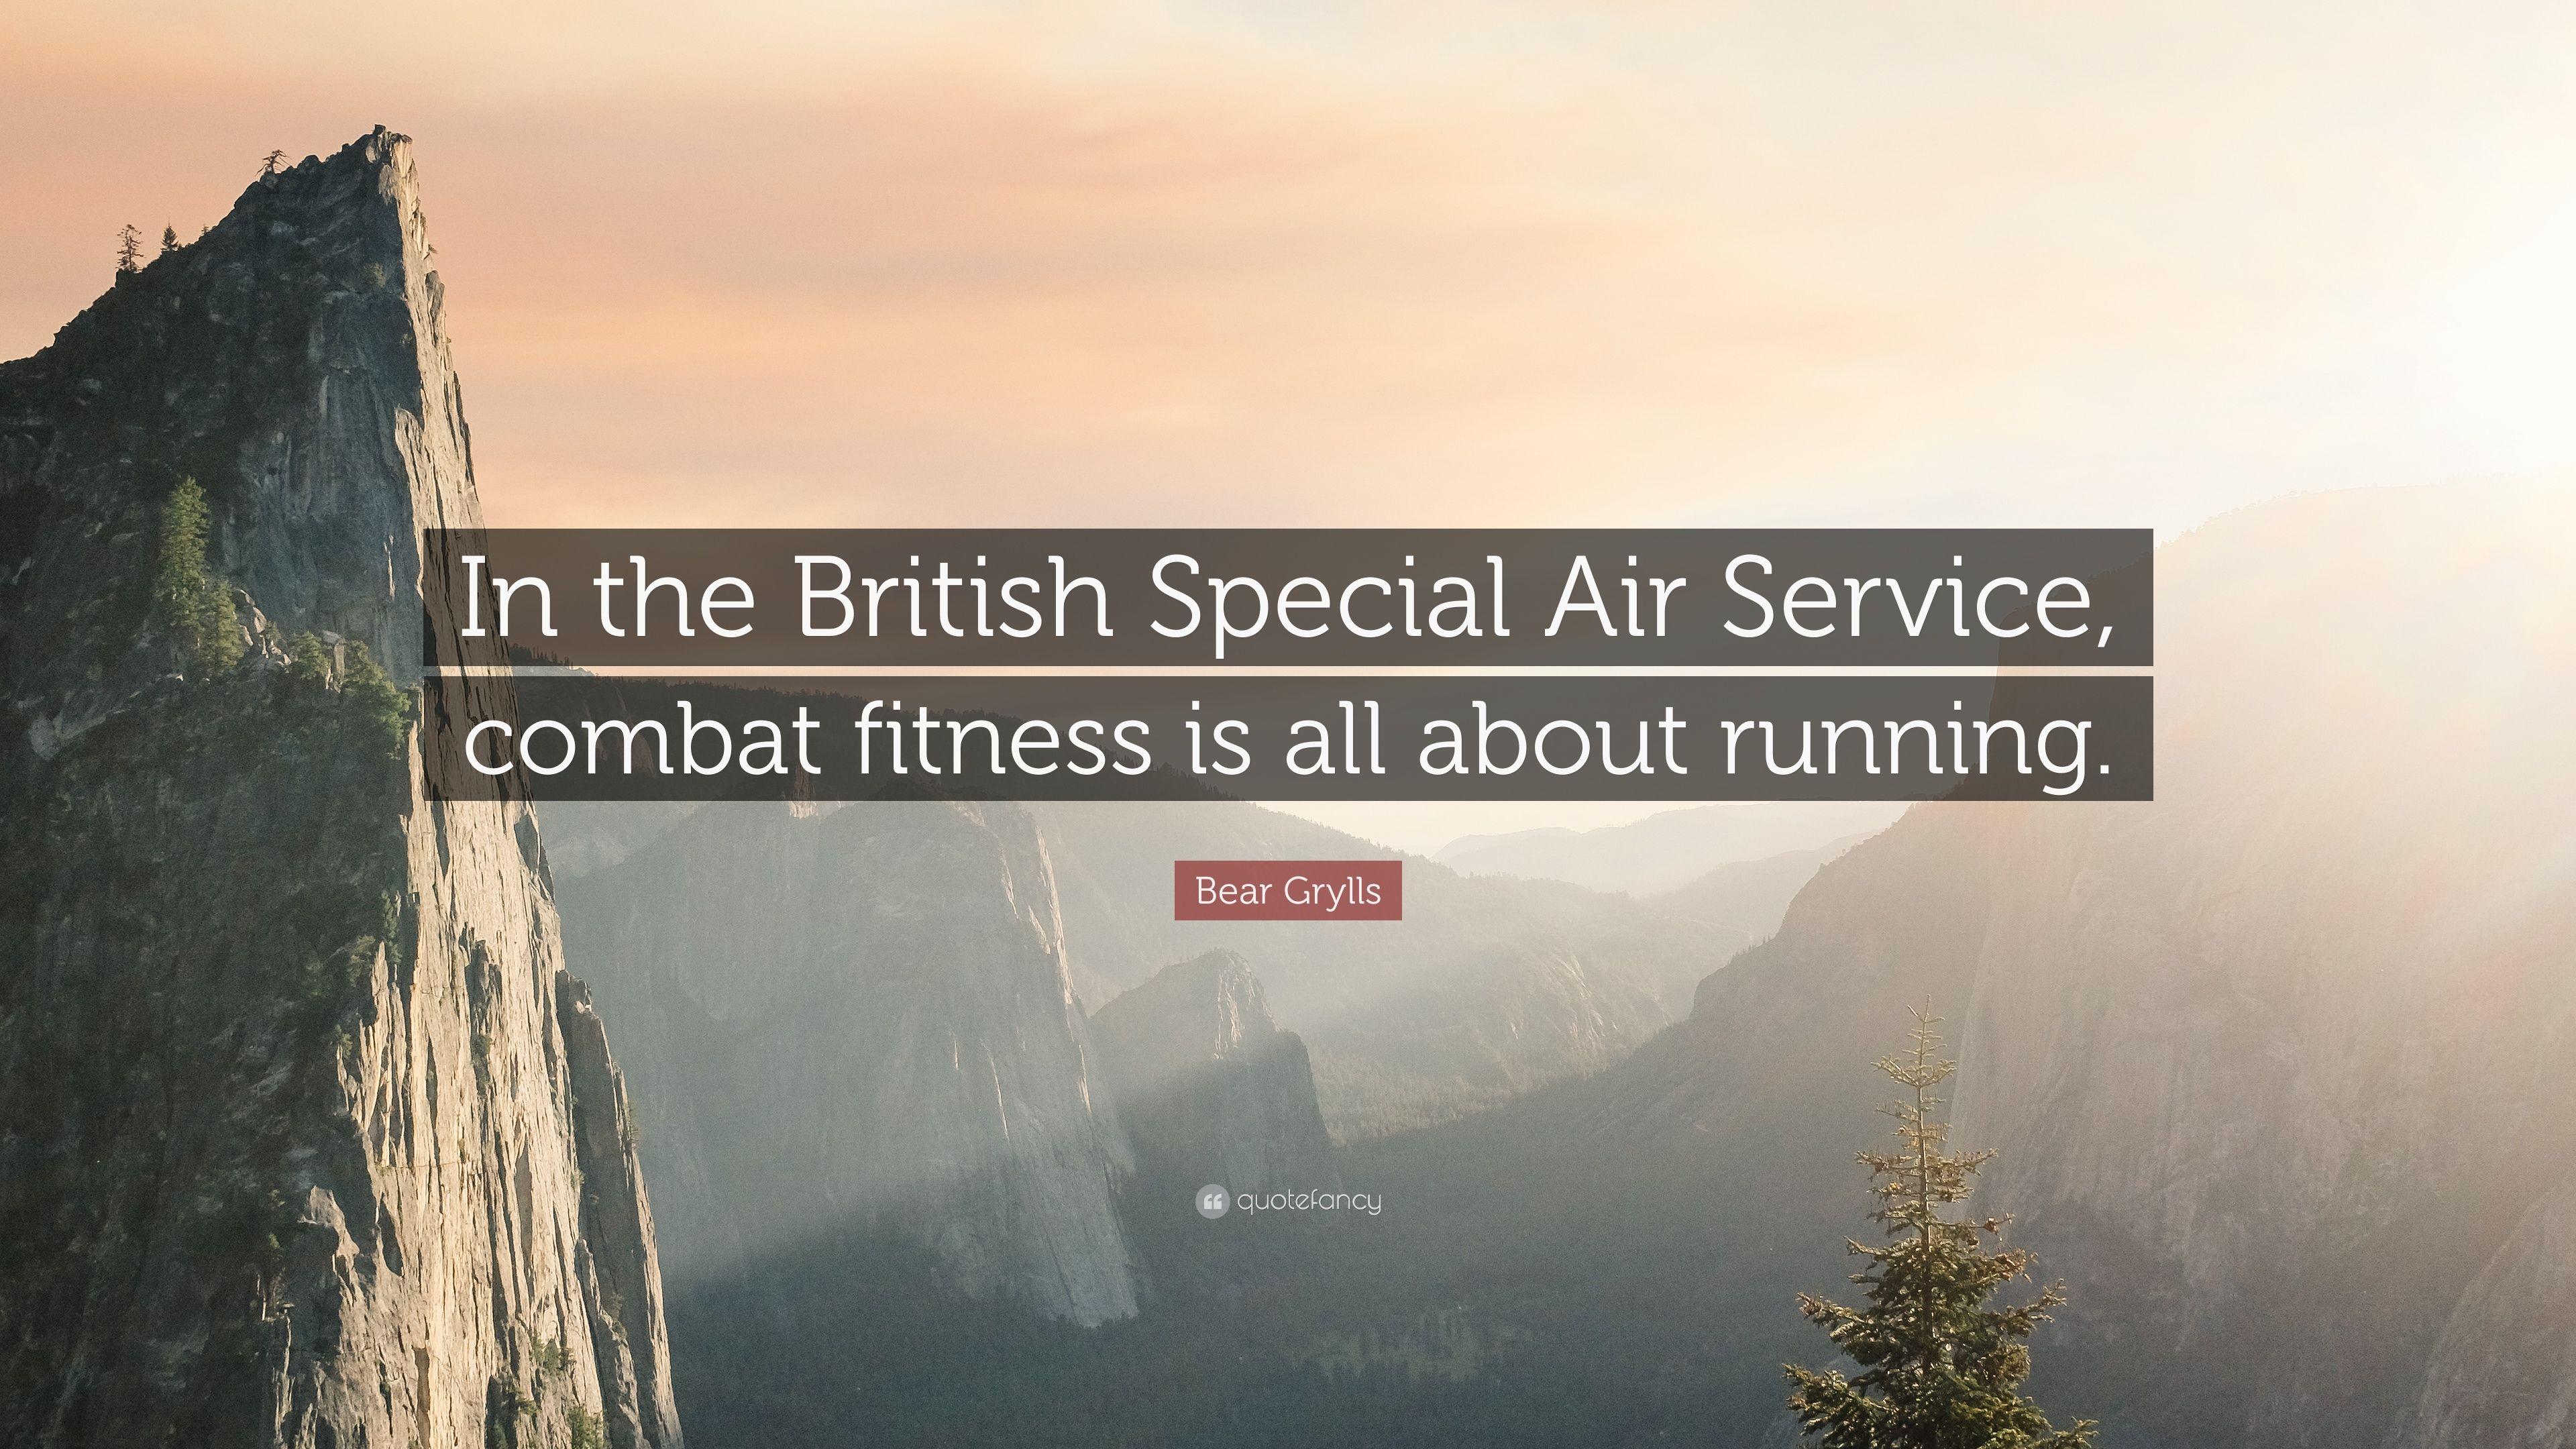 Bear Grylls Quote: “In the British Special Air Service, combat